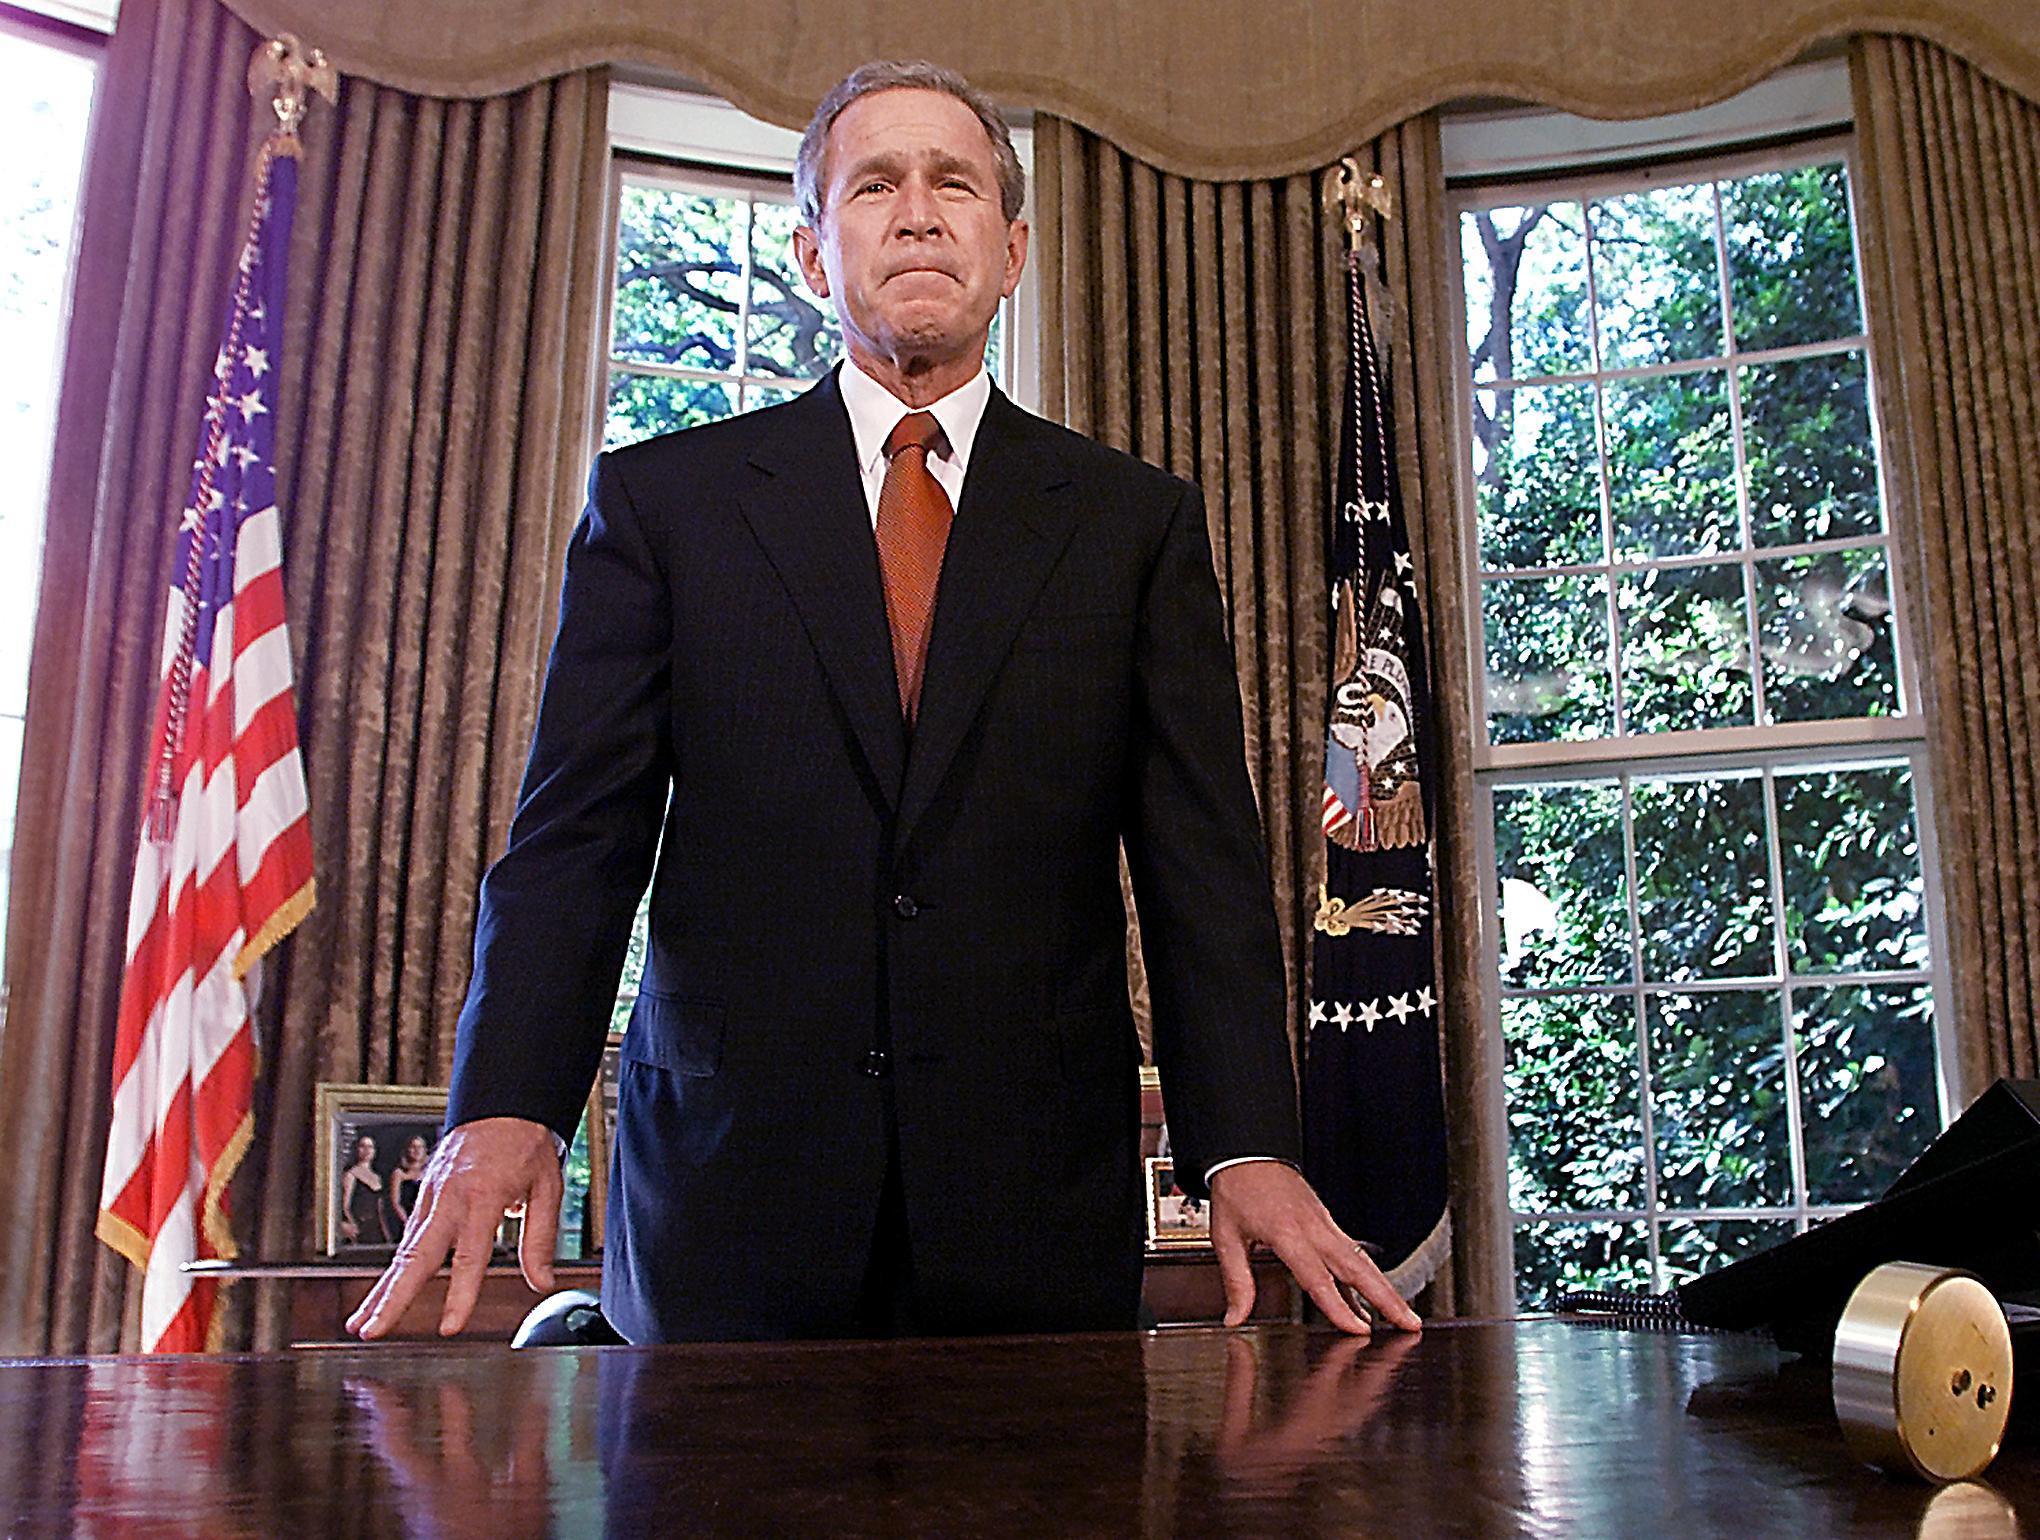 George W Bush should have heeded the warnings of those that came before him